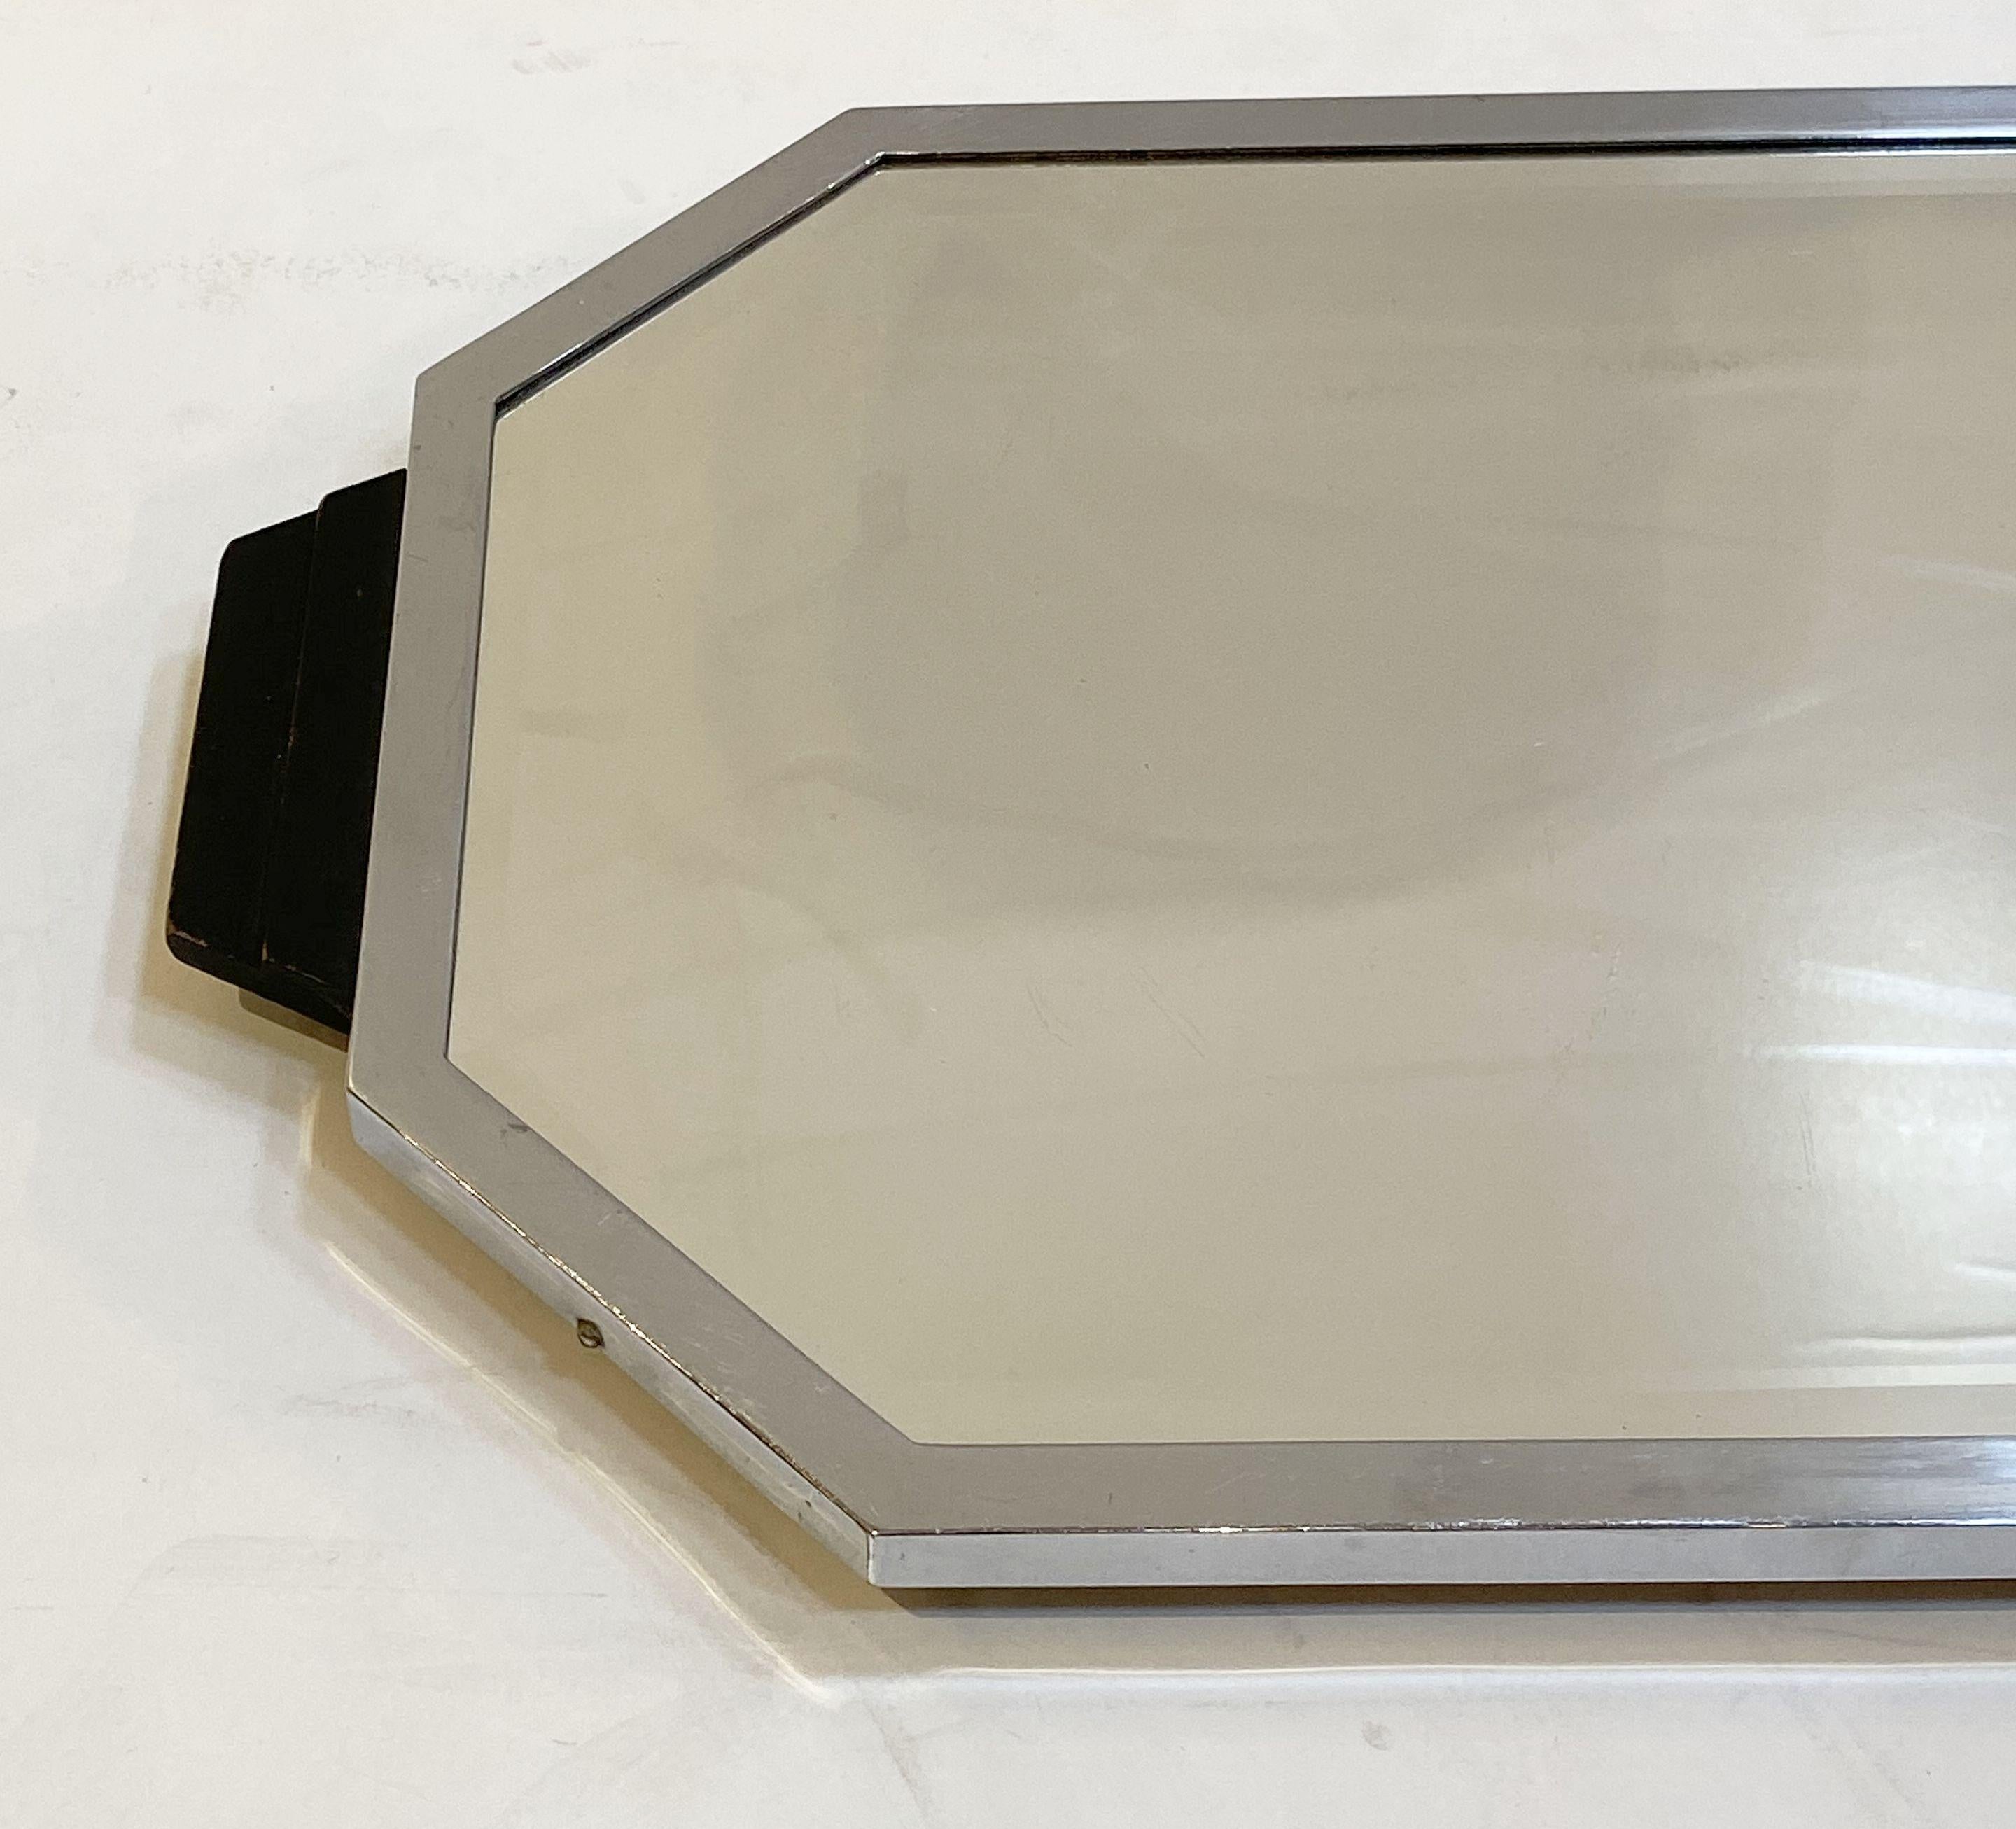 20th Century Art Deco Era Rectangular Mirrored Tray of Chrome and Wood from England